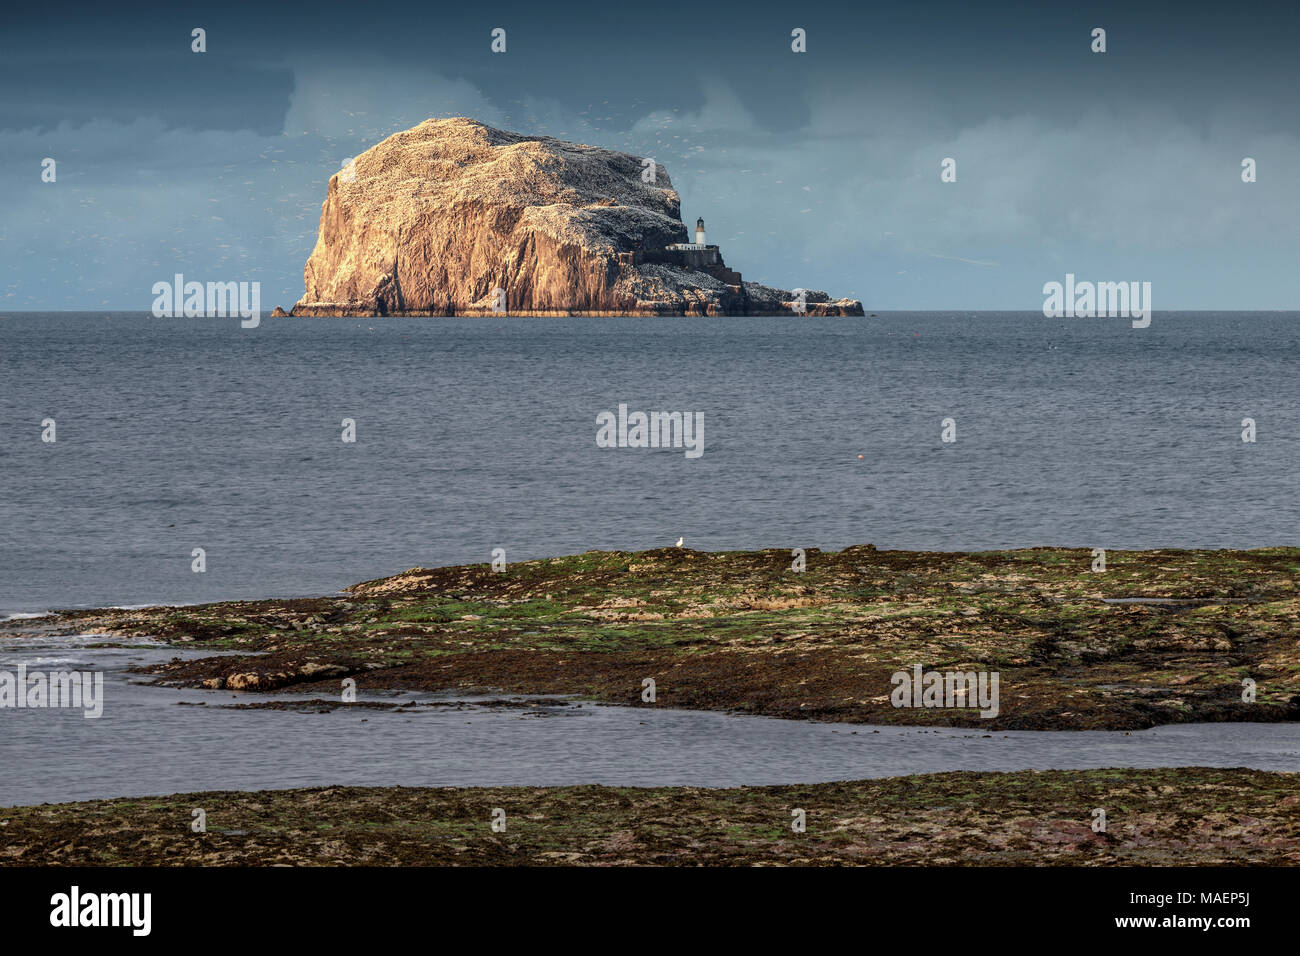 A view from North Berwick of the island of Bass Rock in the Firth of Forth showing nesting gannets. Stock Photo